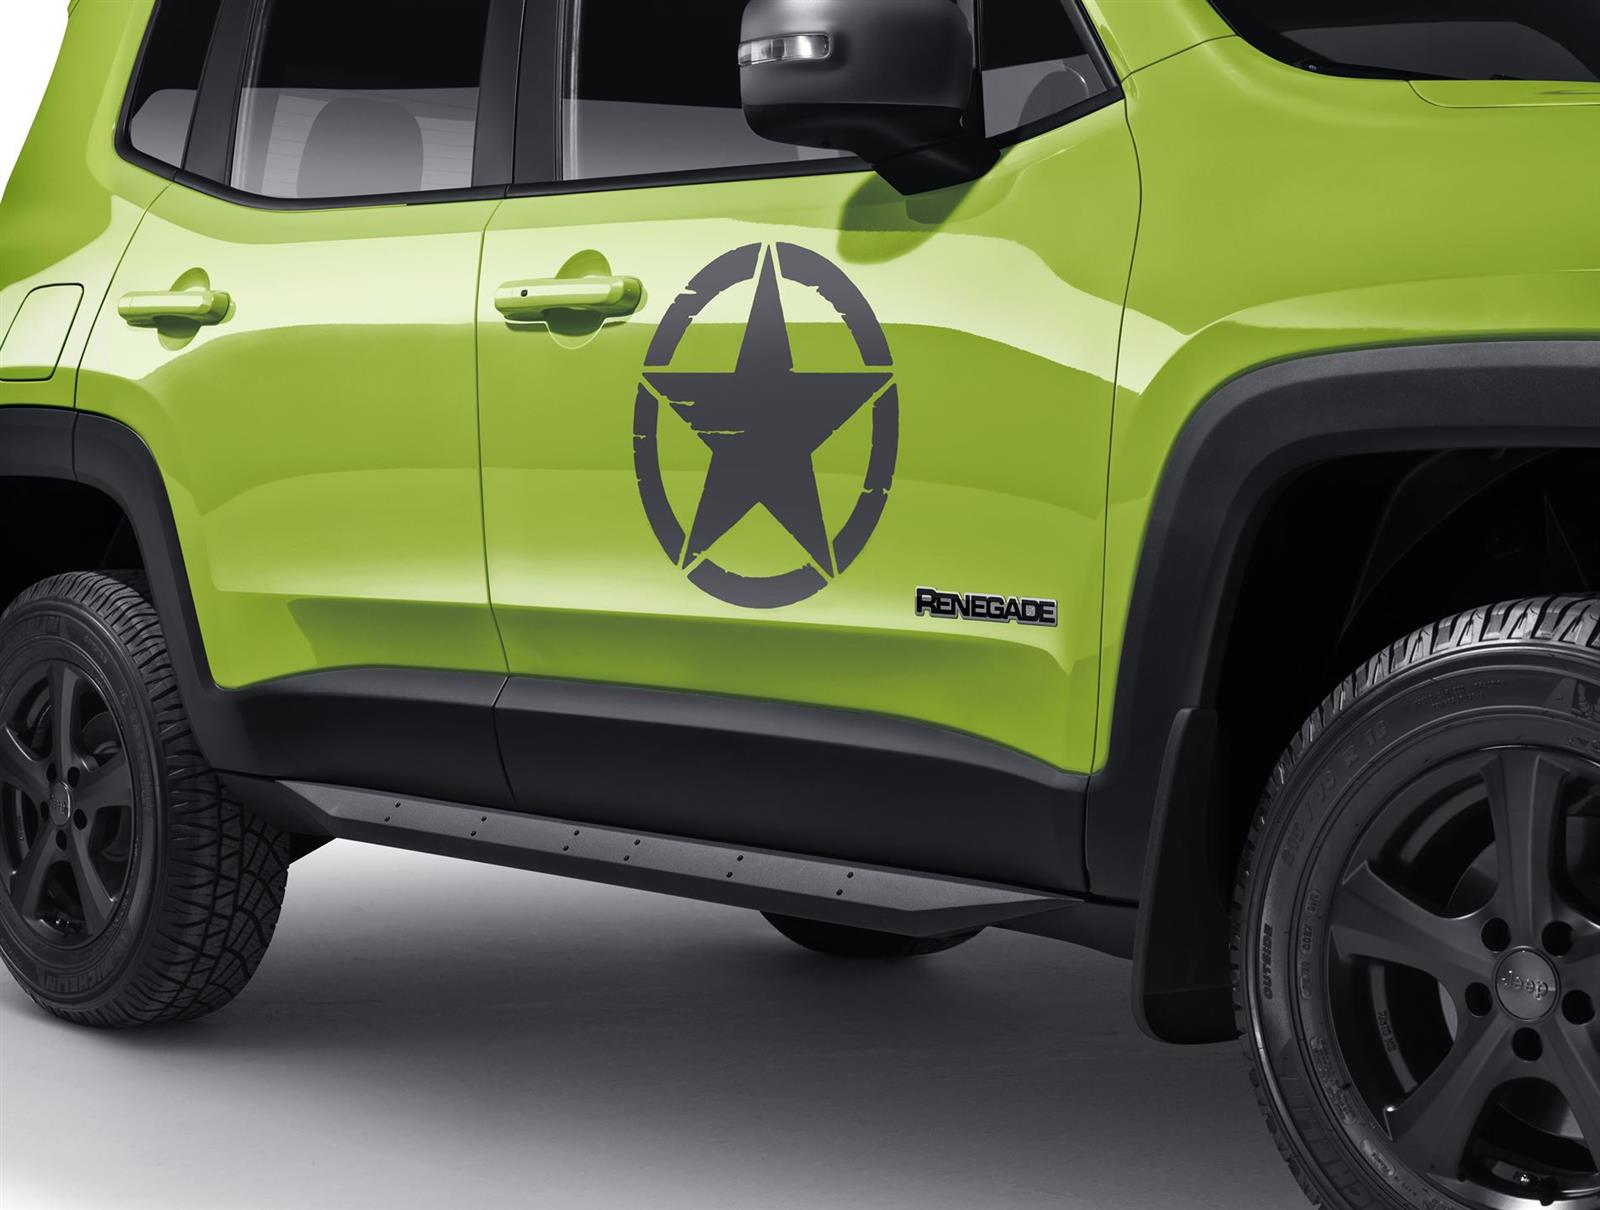 2018 Jeep Renegade Hyper Green Livery